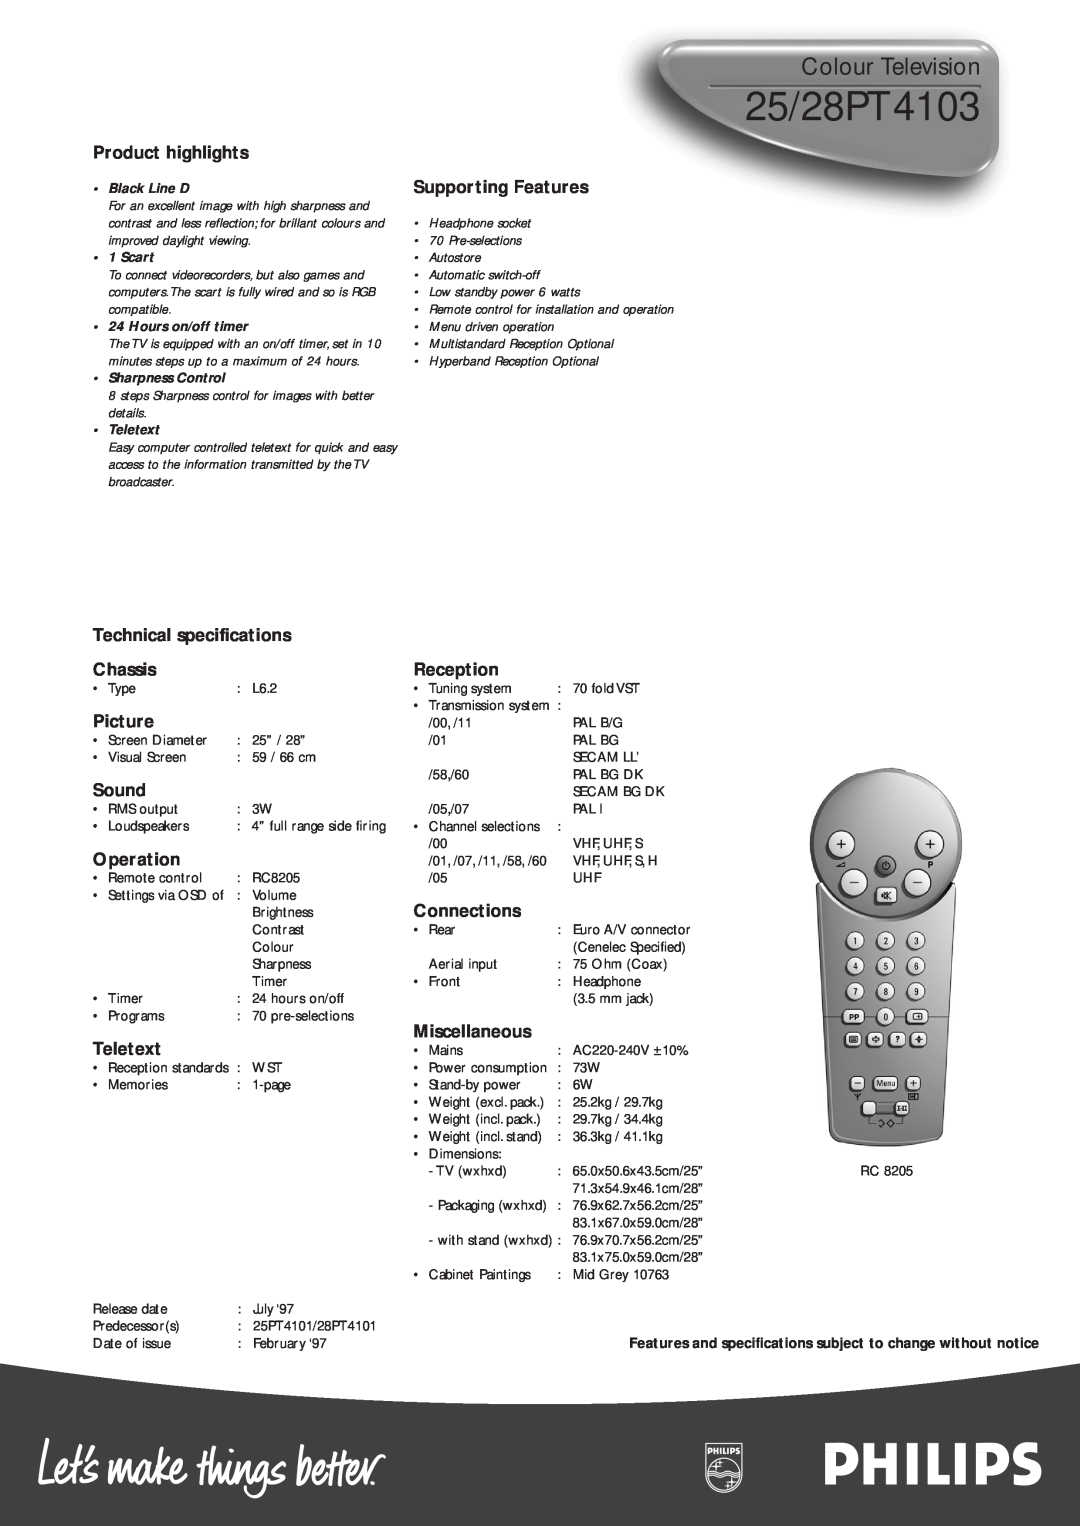 Philips 25/28PT4103, Colour Television, Product highlights, Supporting Features, Technical specifications, Chassis 